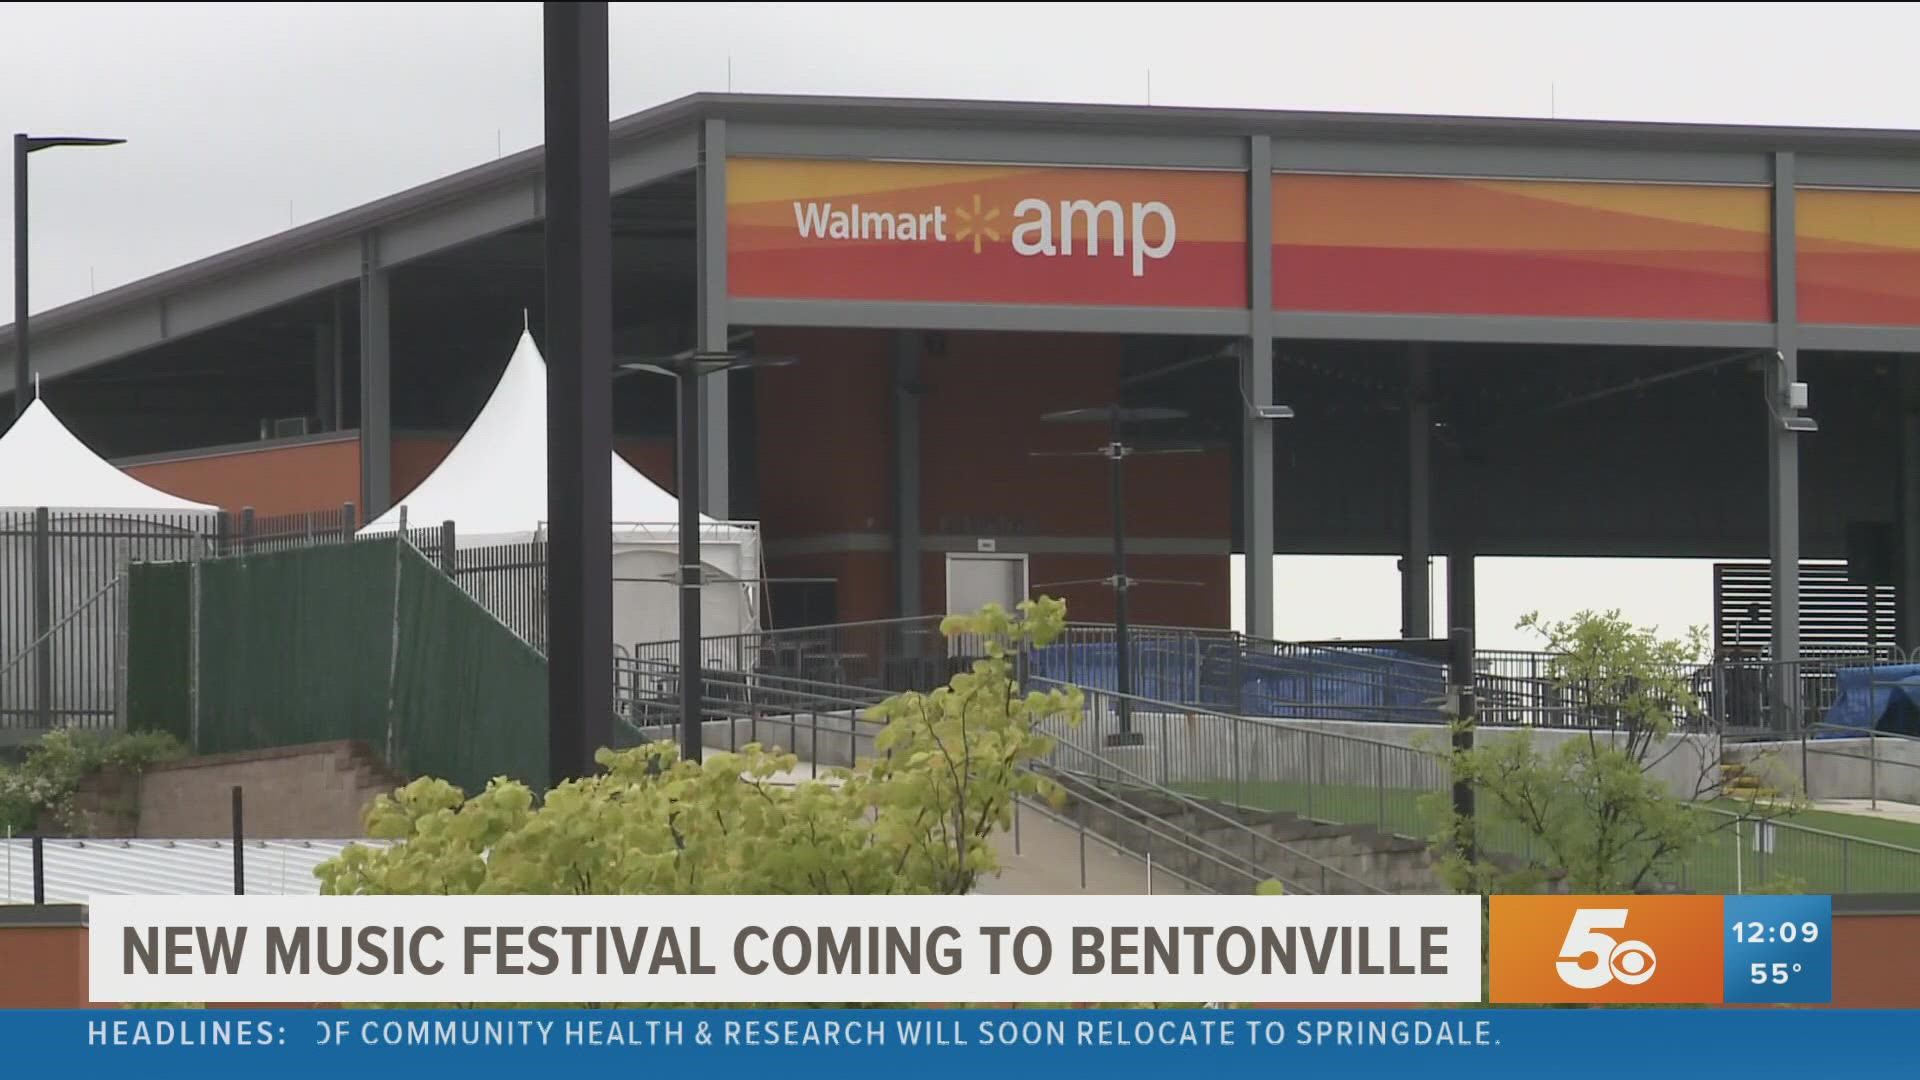 The Walmart AMP is going cashless this season but has added several more food and drink options for concertgoers.